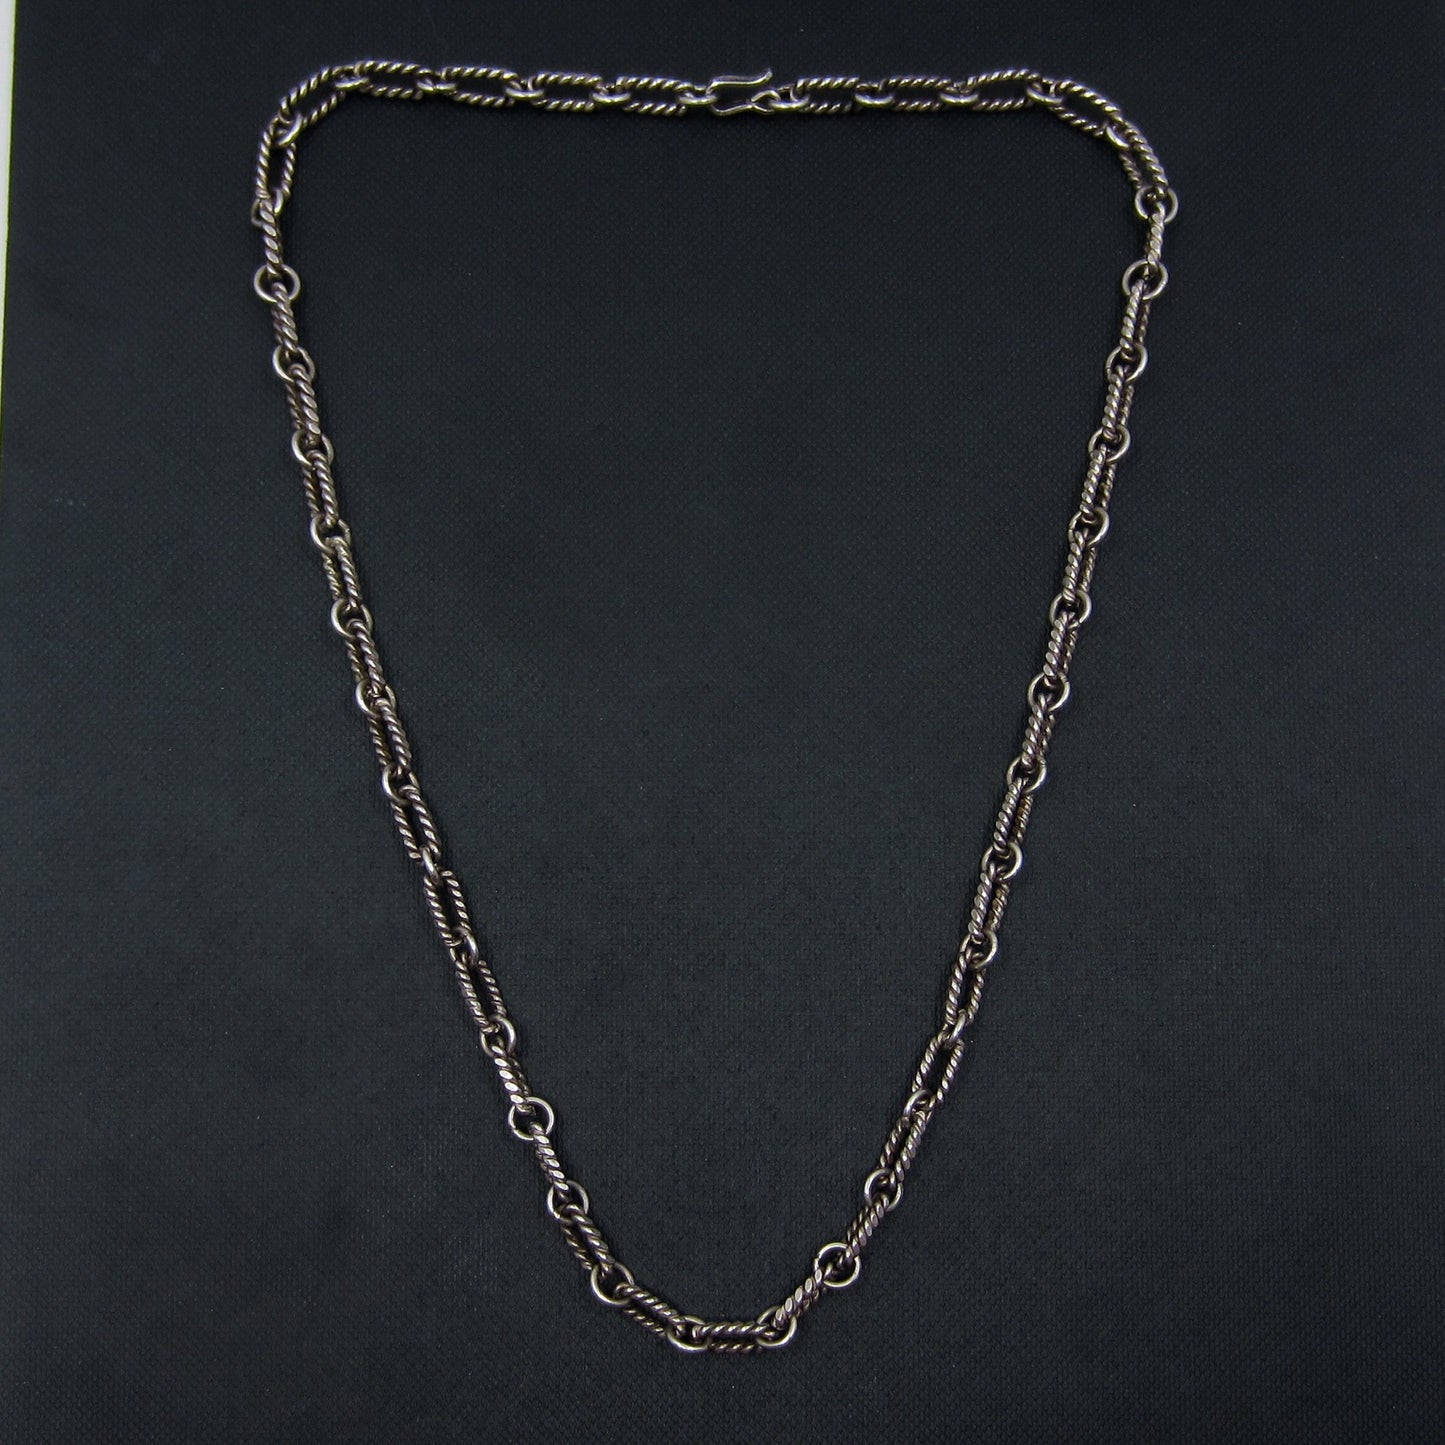 SOLD--Vintage Mid-Century Twist Link Chain Sterling, Taxco c. 1970